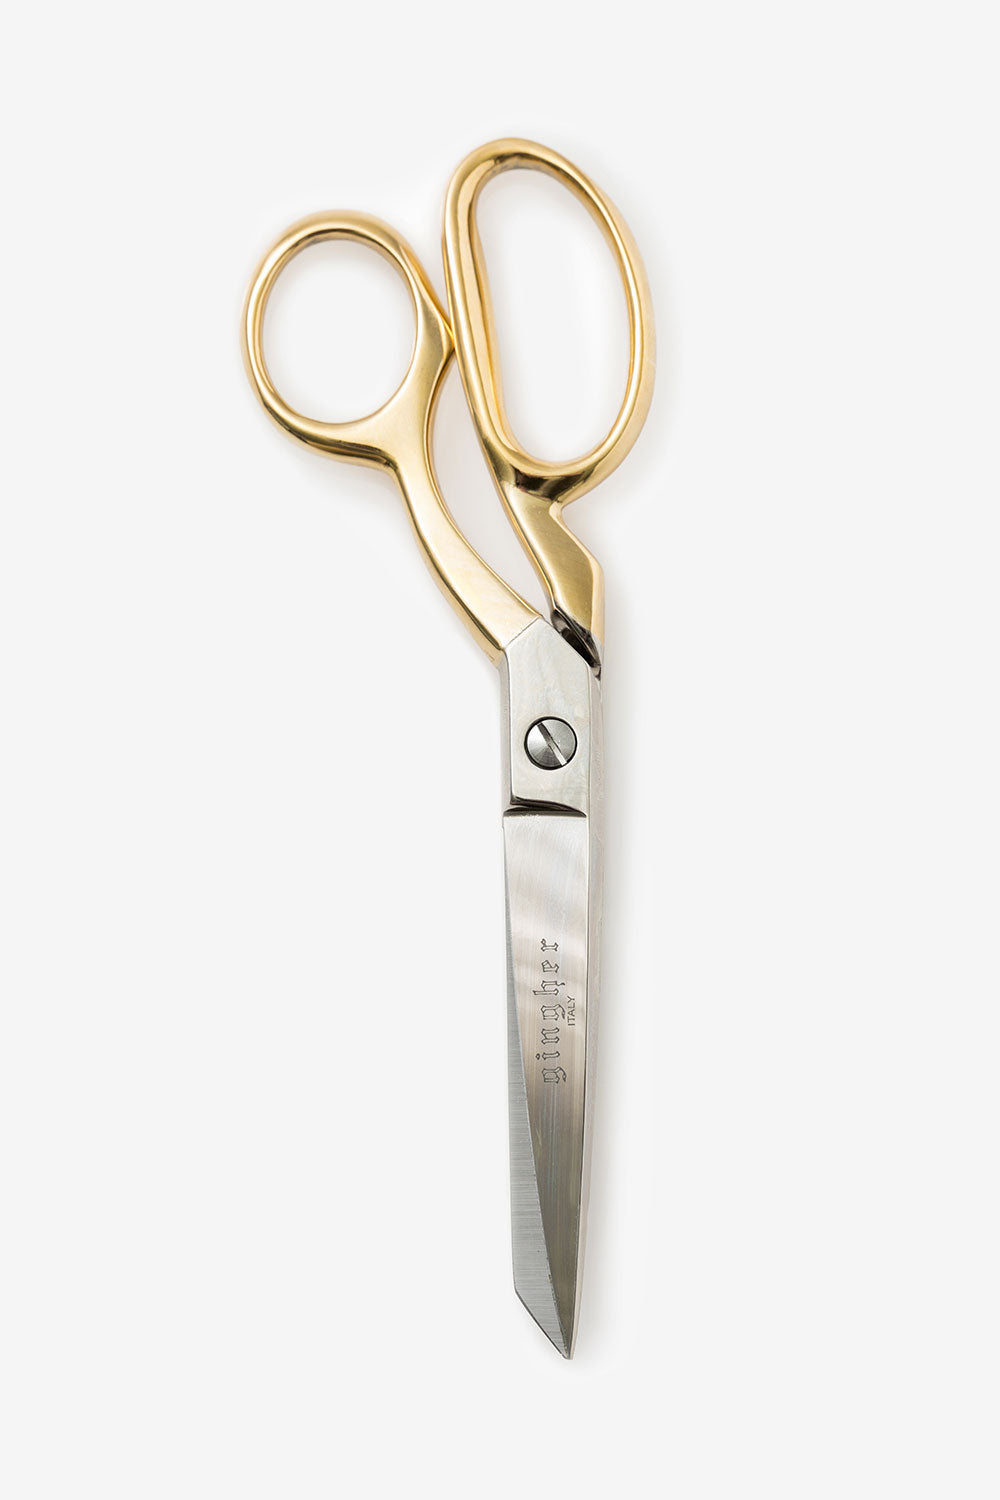 Gingher® 5 Knife-Edge Sewing Scissors